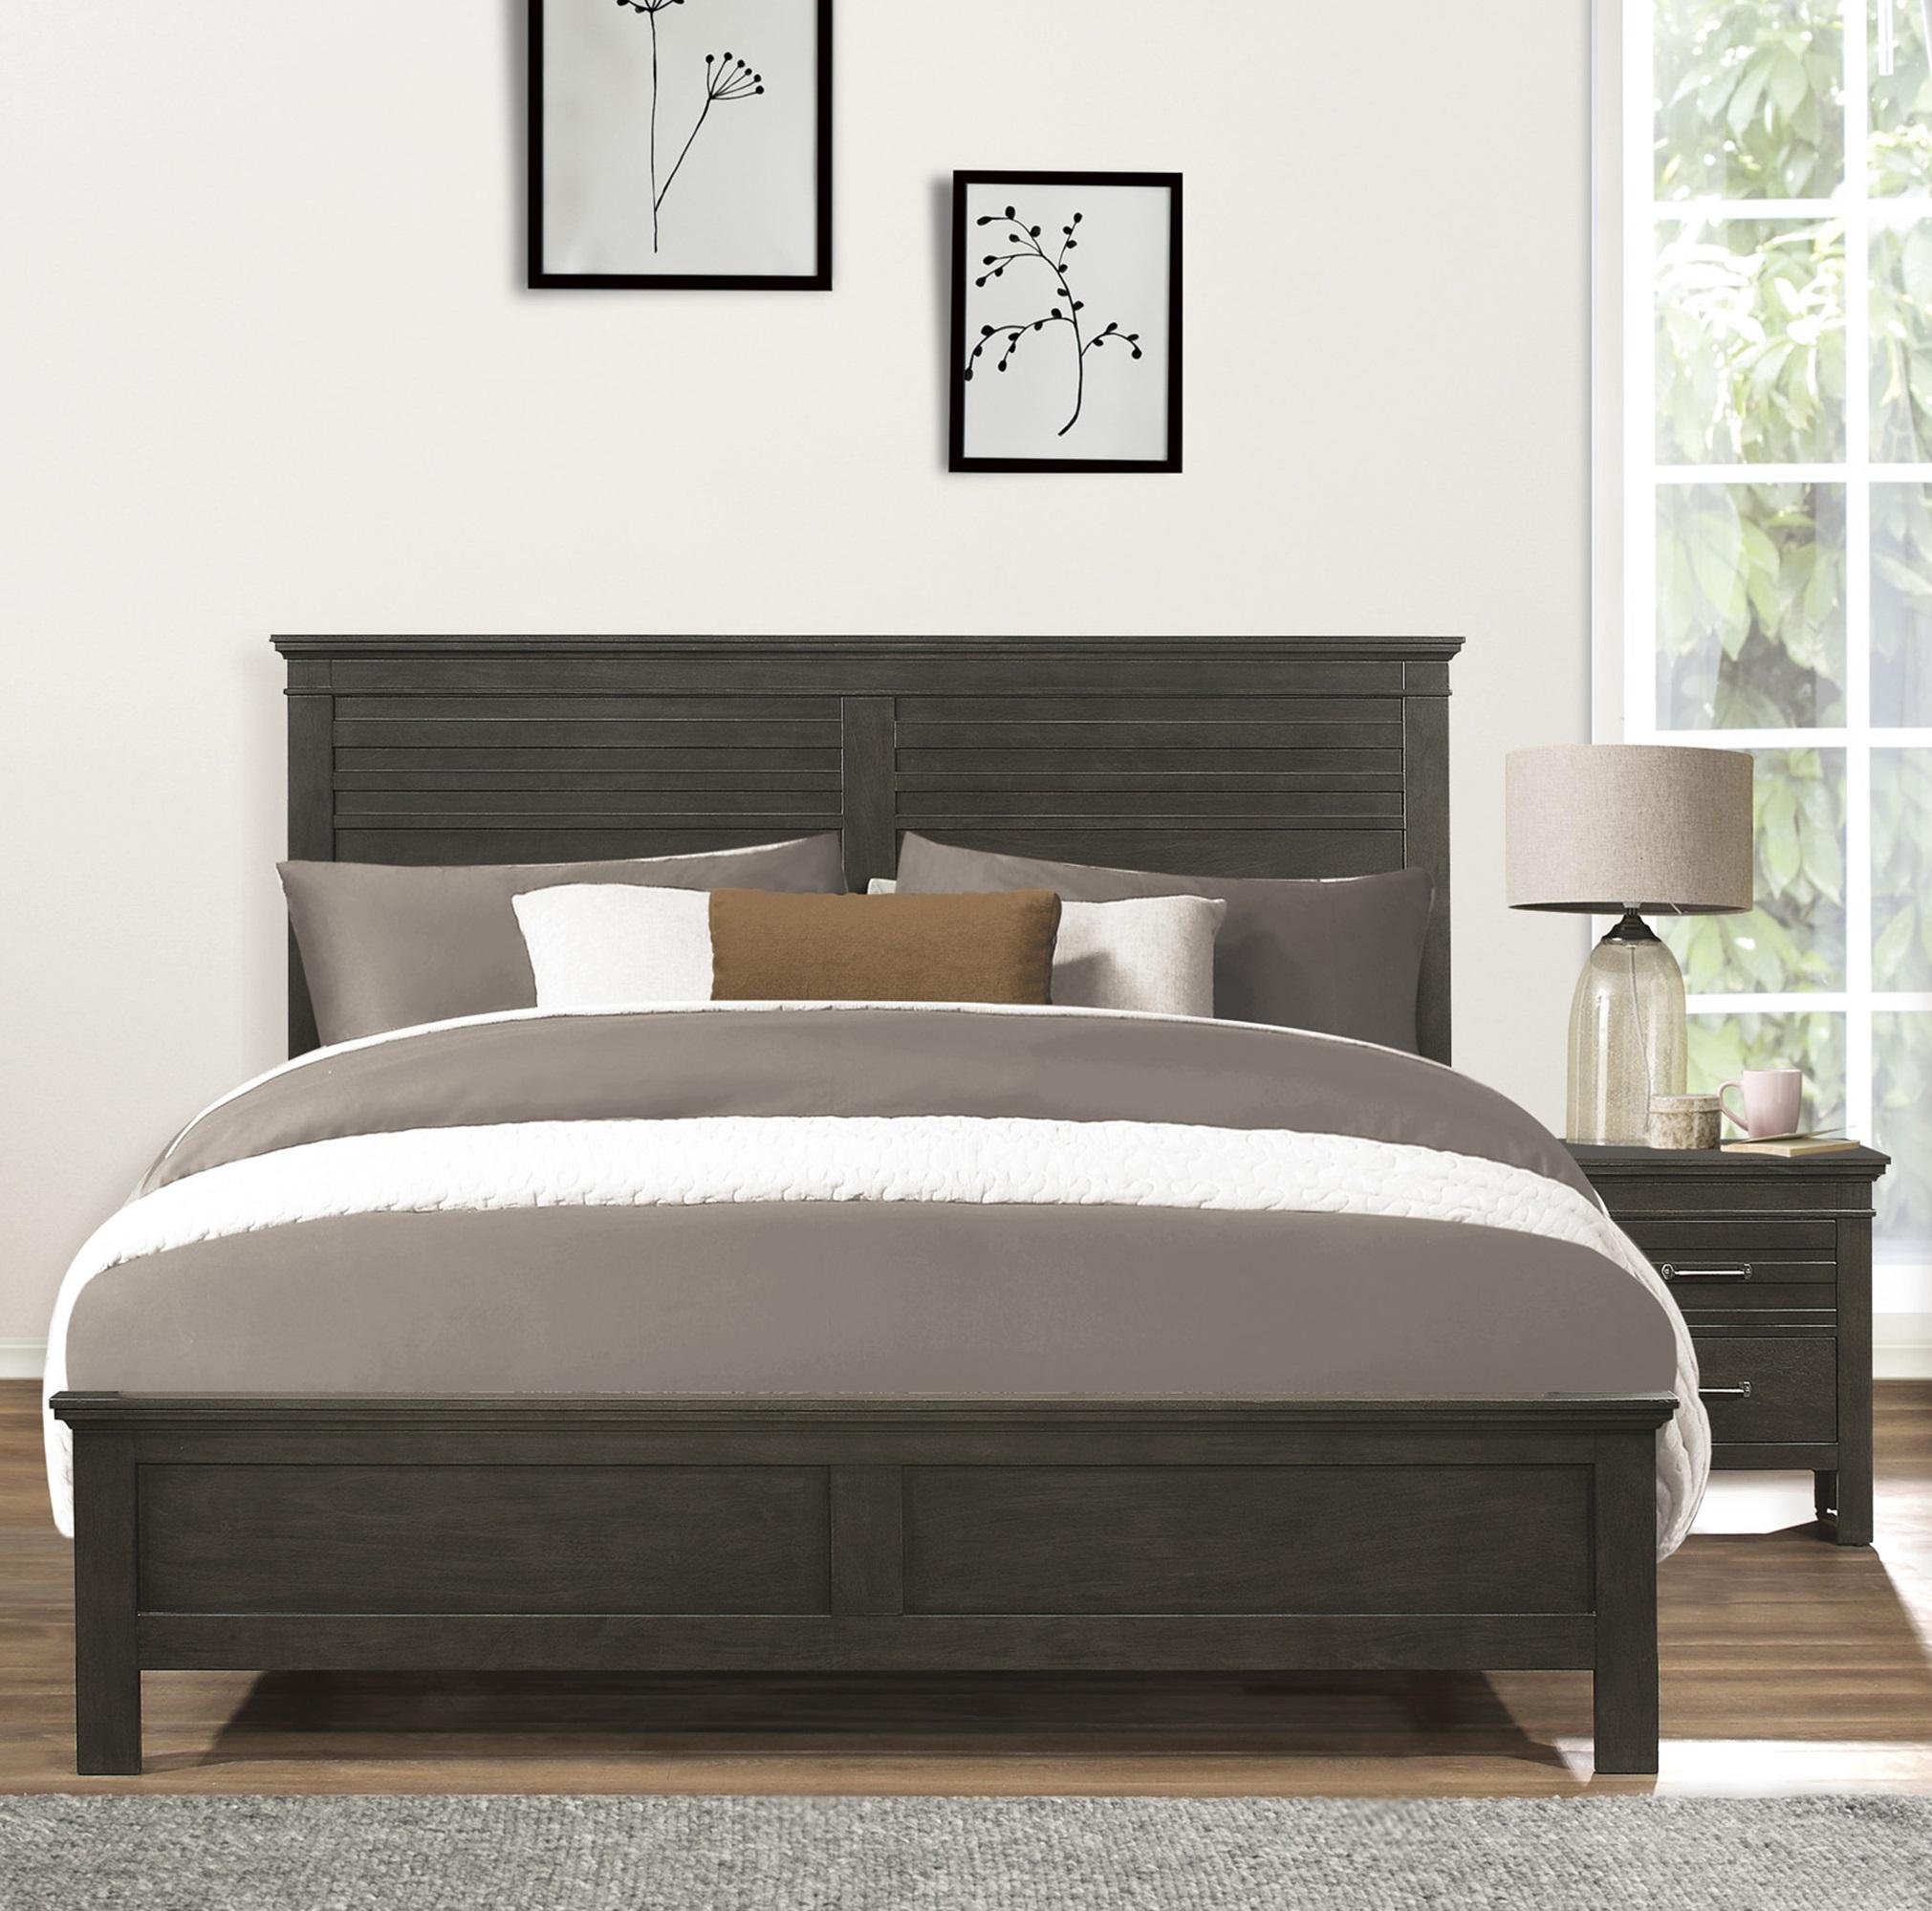 Transitional Bedroom Set 1675F-1-3PC Blaire Farm 1675F-1-3PC in Charcoal 